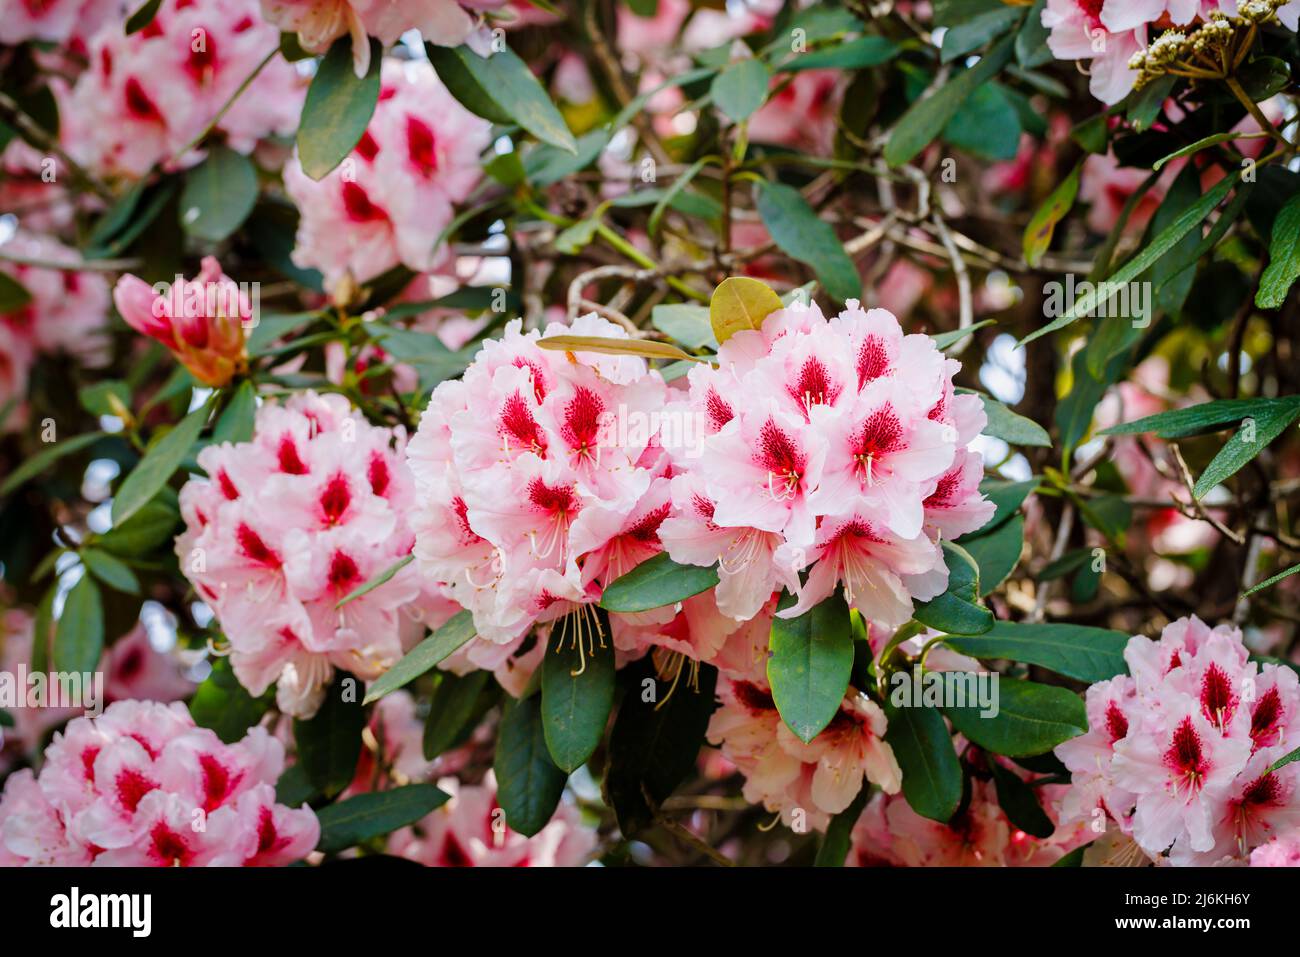 Large rhododendron flower heads with pink petals and mottled deep red throats growing in a garden in Surrey, south-east England Stock Photo